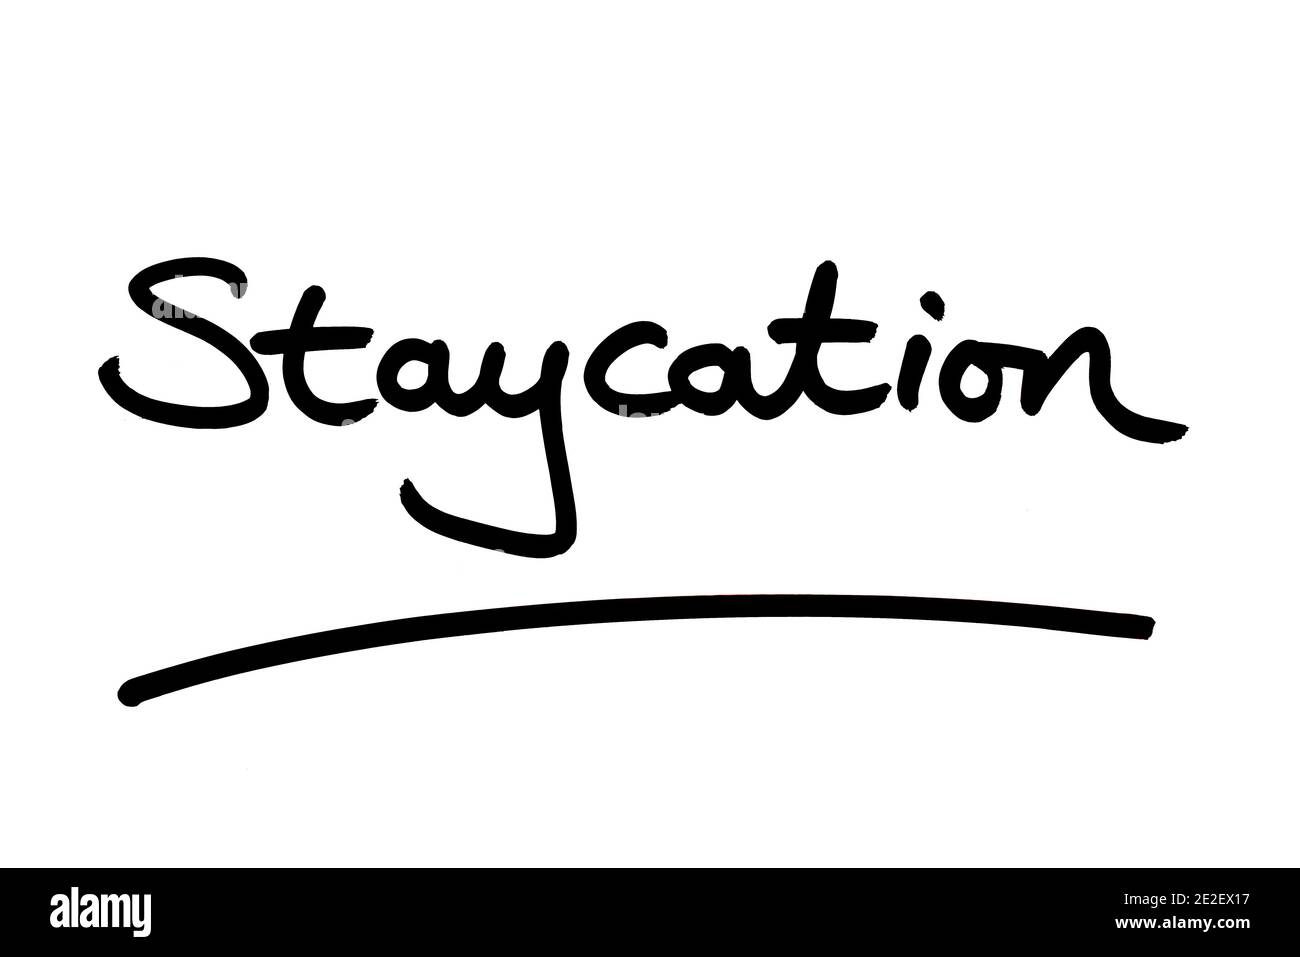 The word Staycation handwritten on a white background. Stock Photo